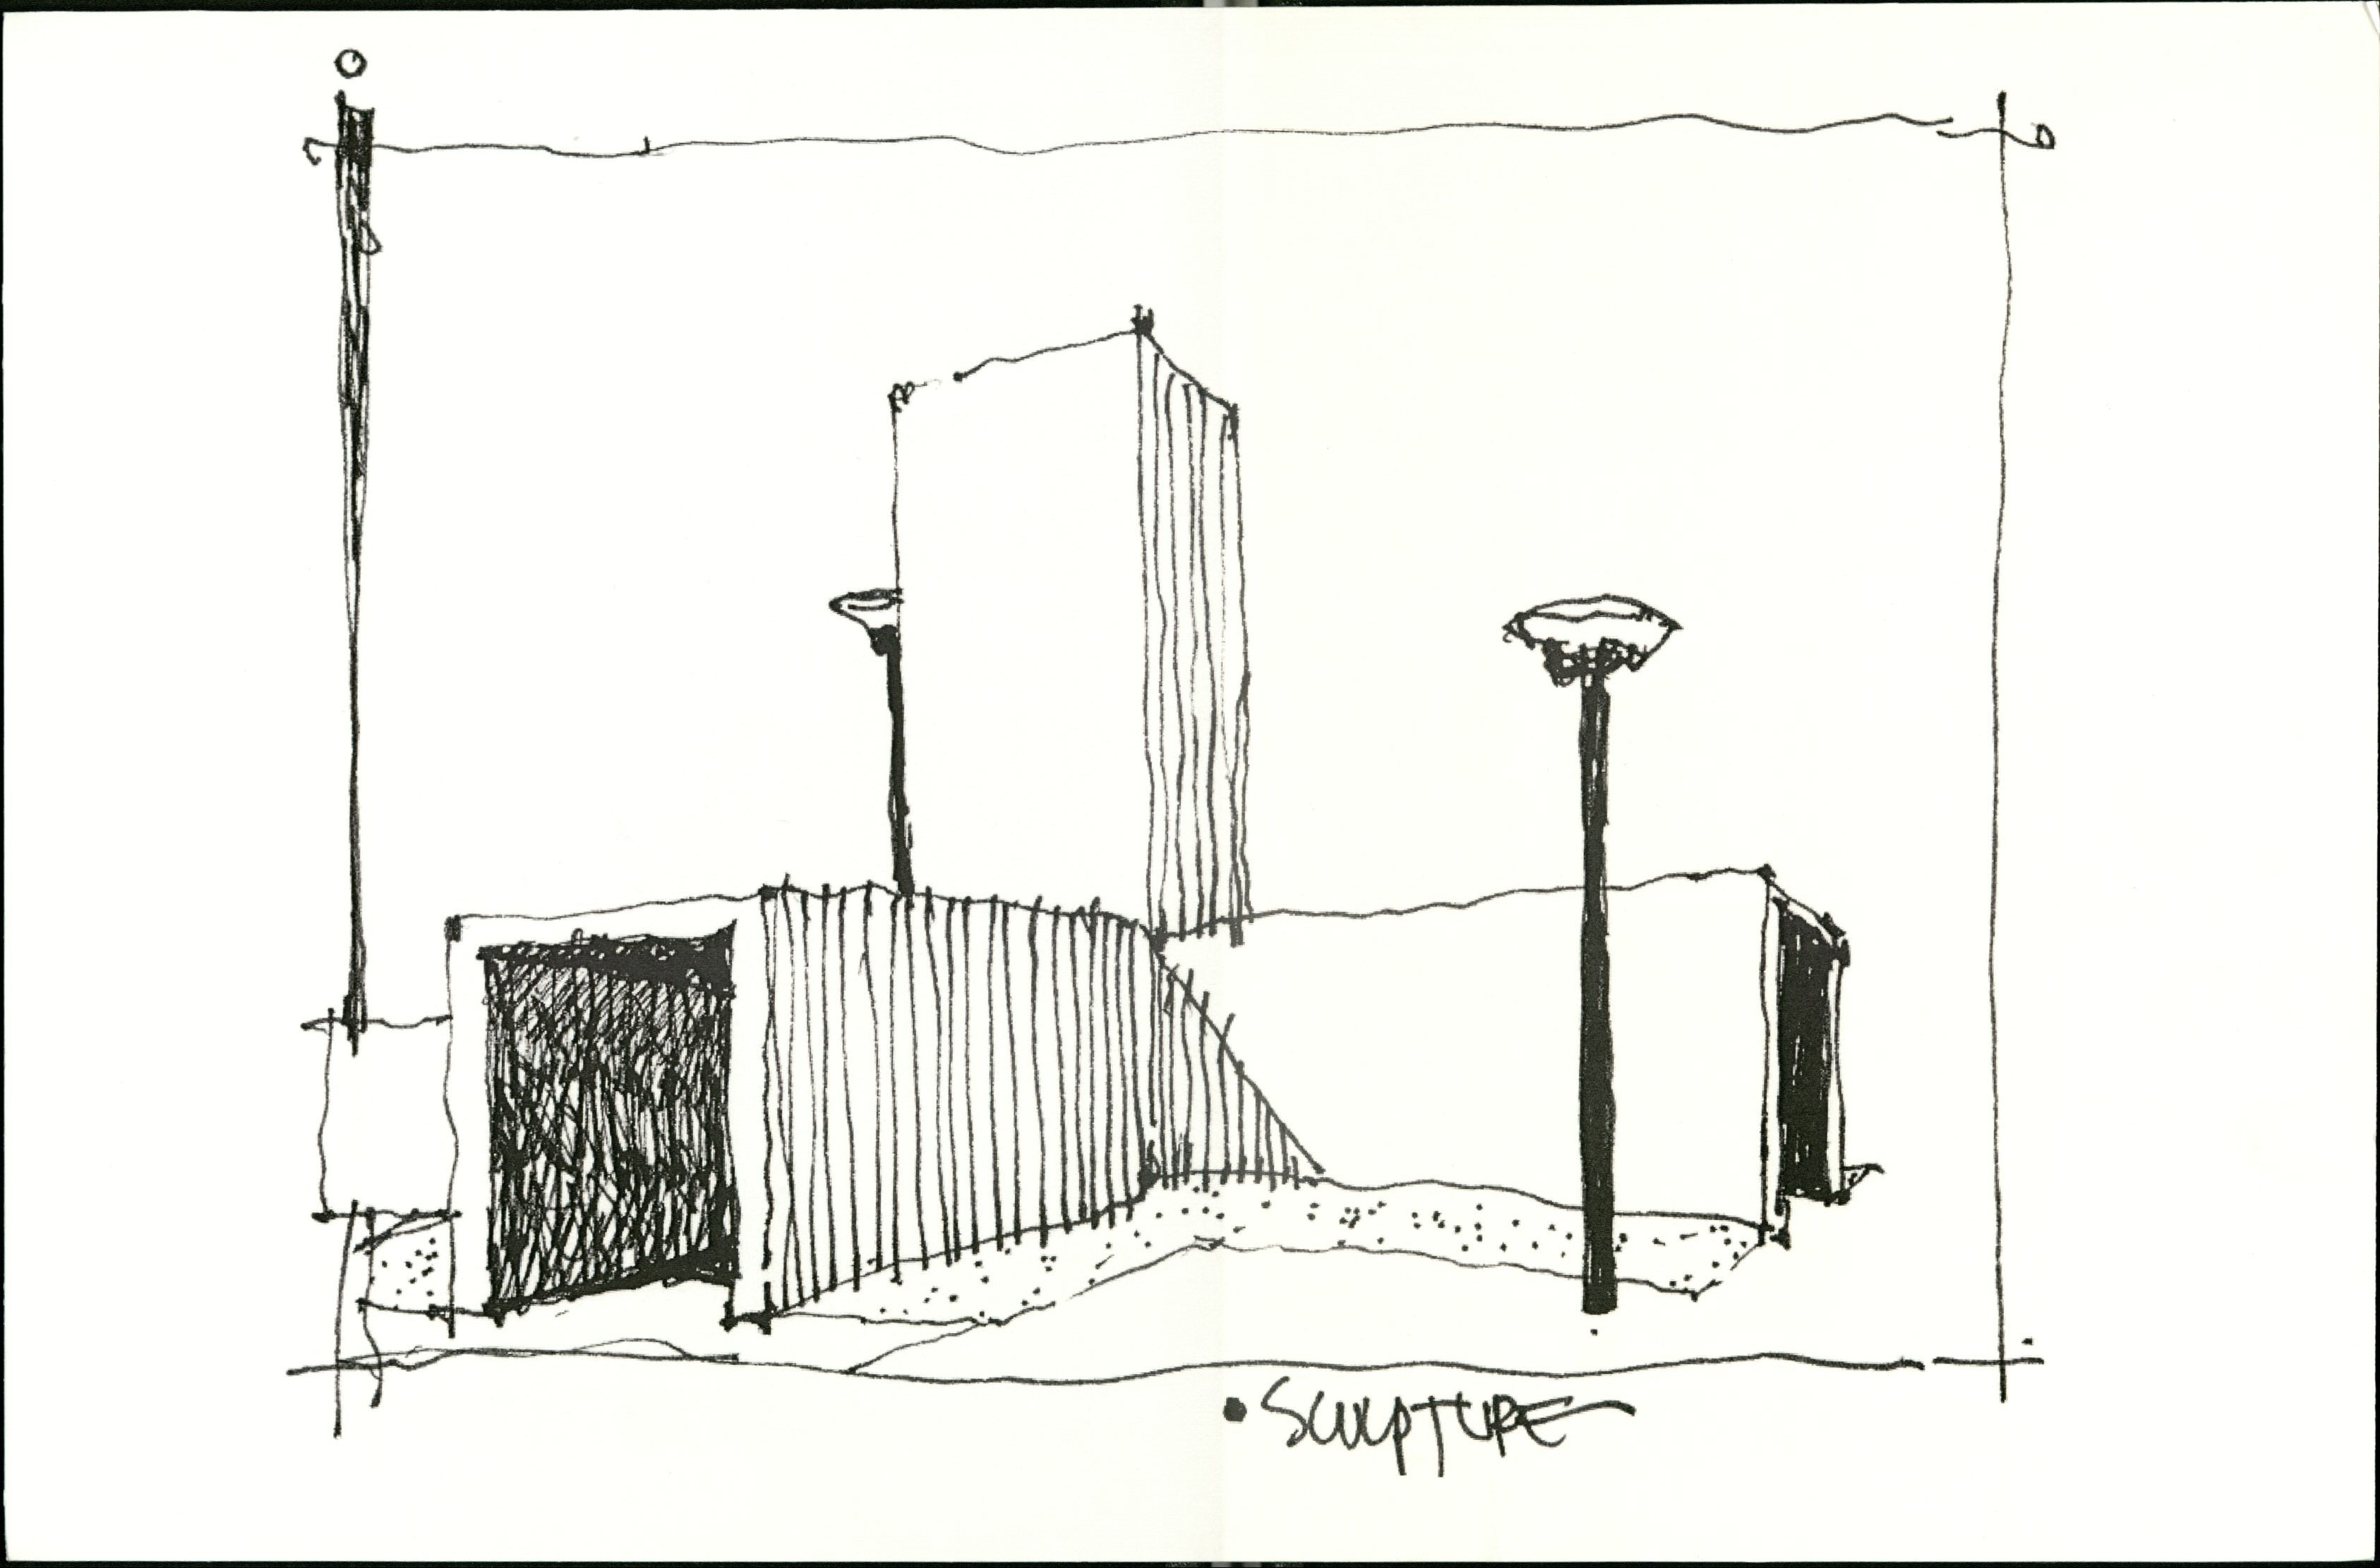 An original sketch for the sculpture by Bruce Nauman, 1988. Facility Planning #028, Oversize Drawer